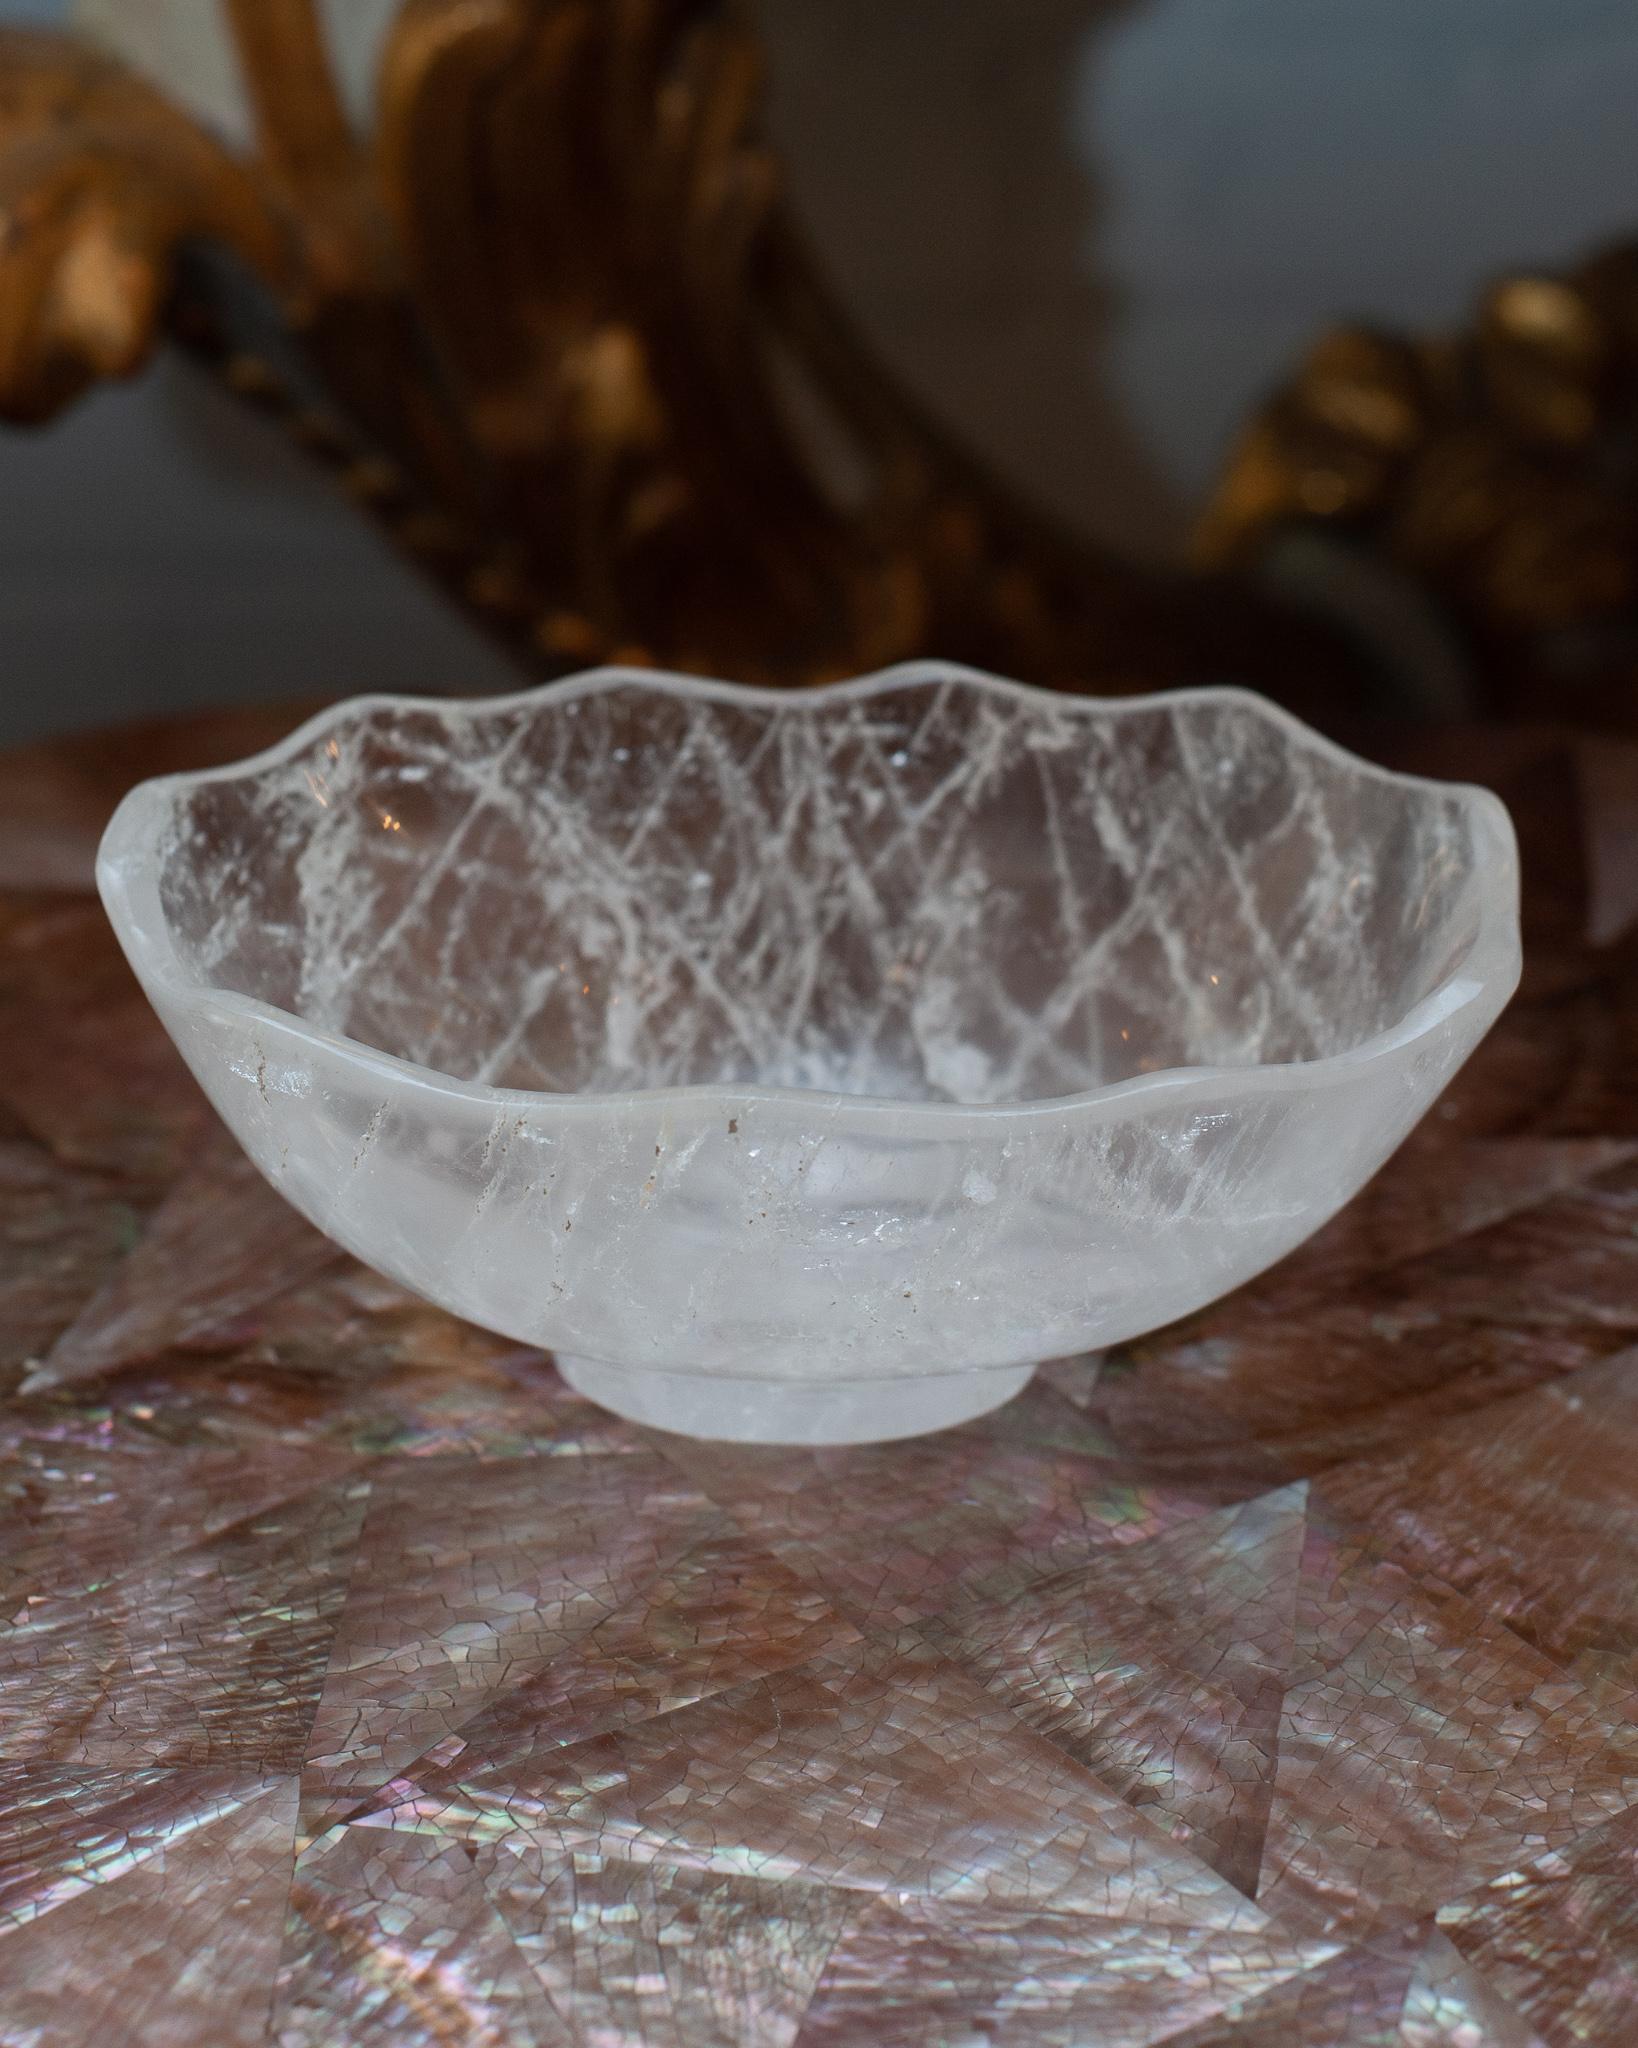 Bring the healing energy of rock crystal into your home with this beautiful carved bowl. This delicately carved bowl with a scalloped edge can filled with candies or kept sculptural as an empty vessel and placed in any space.